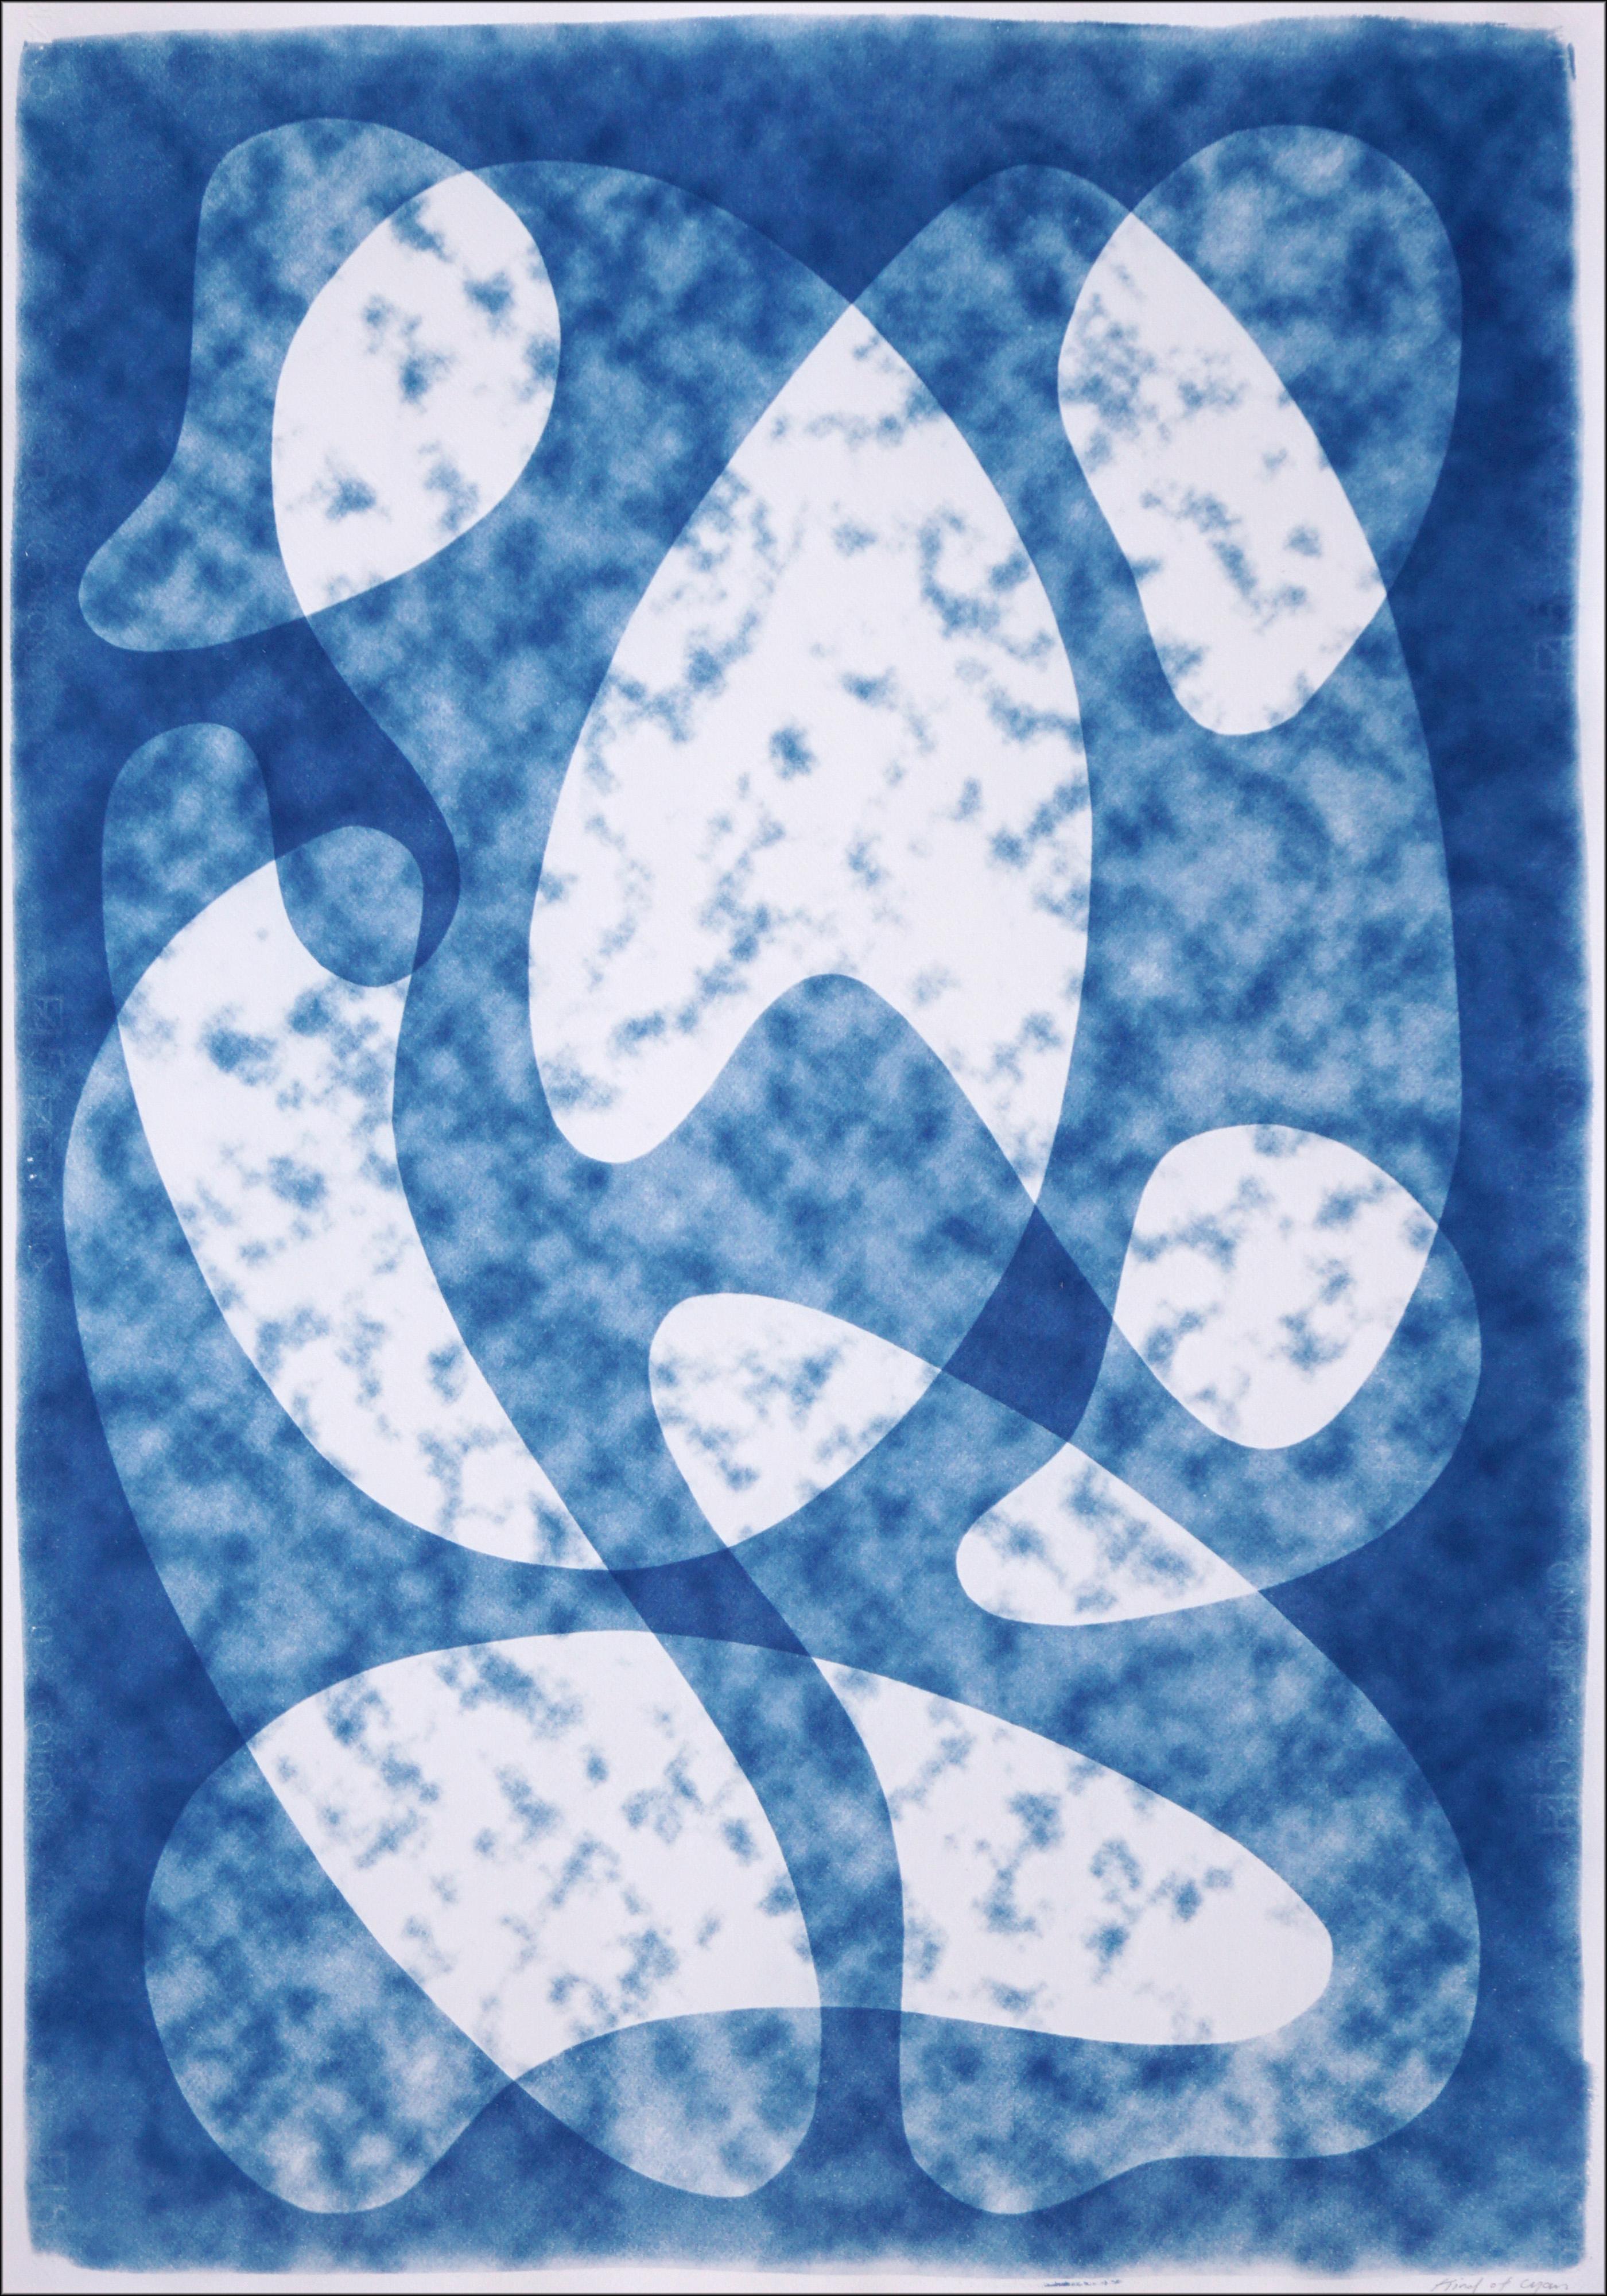 Dark Cloudy Shapes, Mid-Century Modern Kidney Forms, Blue and White Transparency